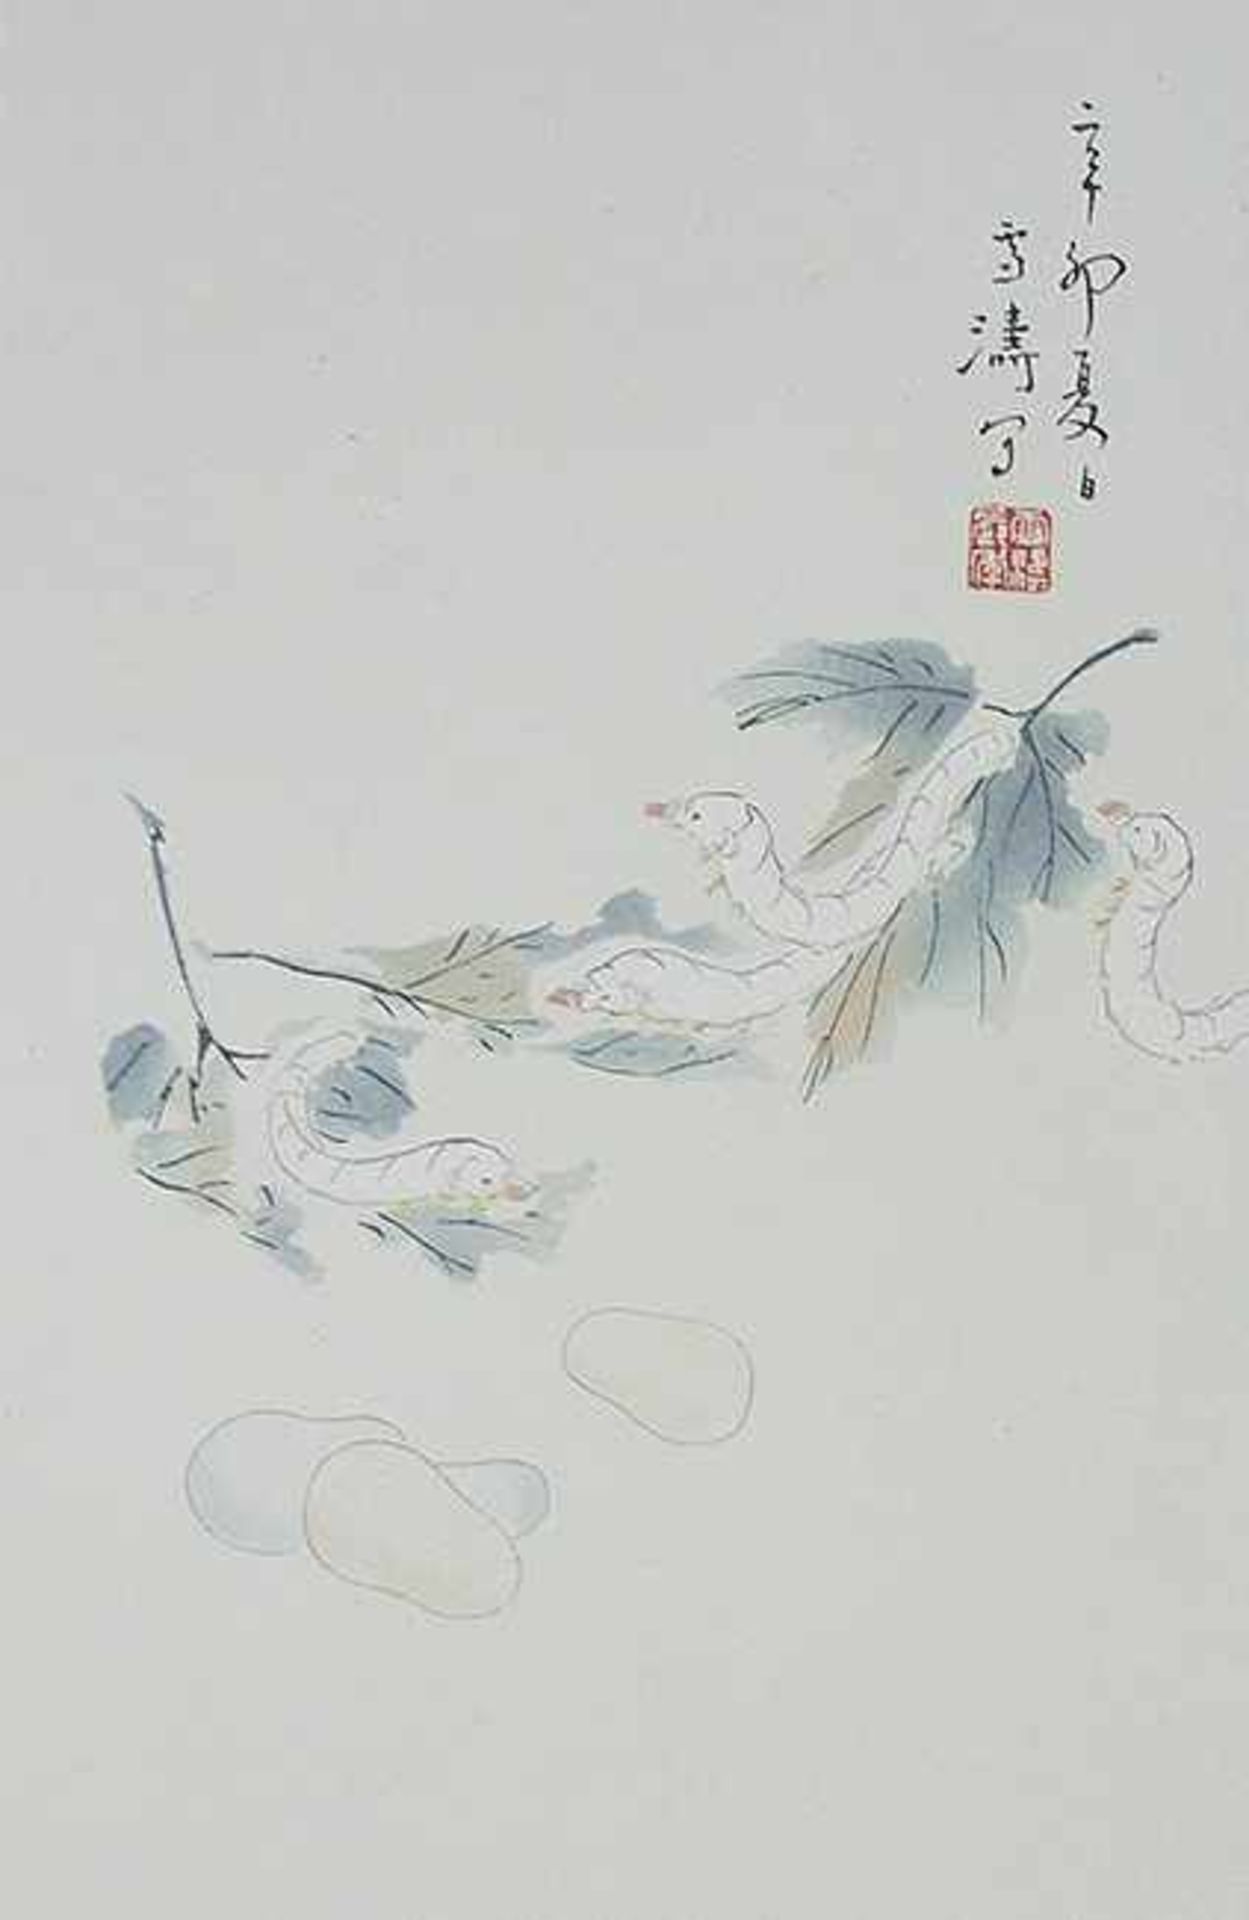 WANG XUETAO (1903-1982) Watercolor woodblock print. China, Silkworms on mulberry leaves, noted by